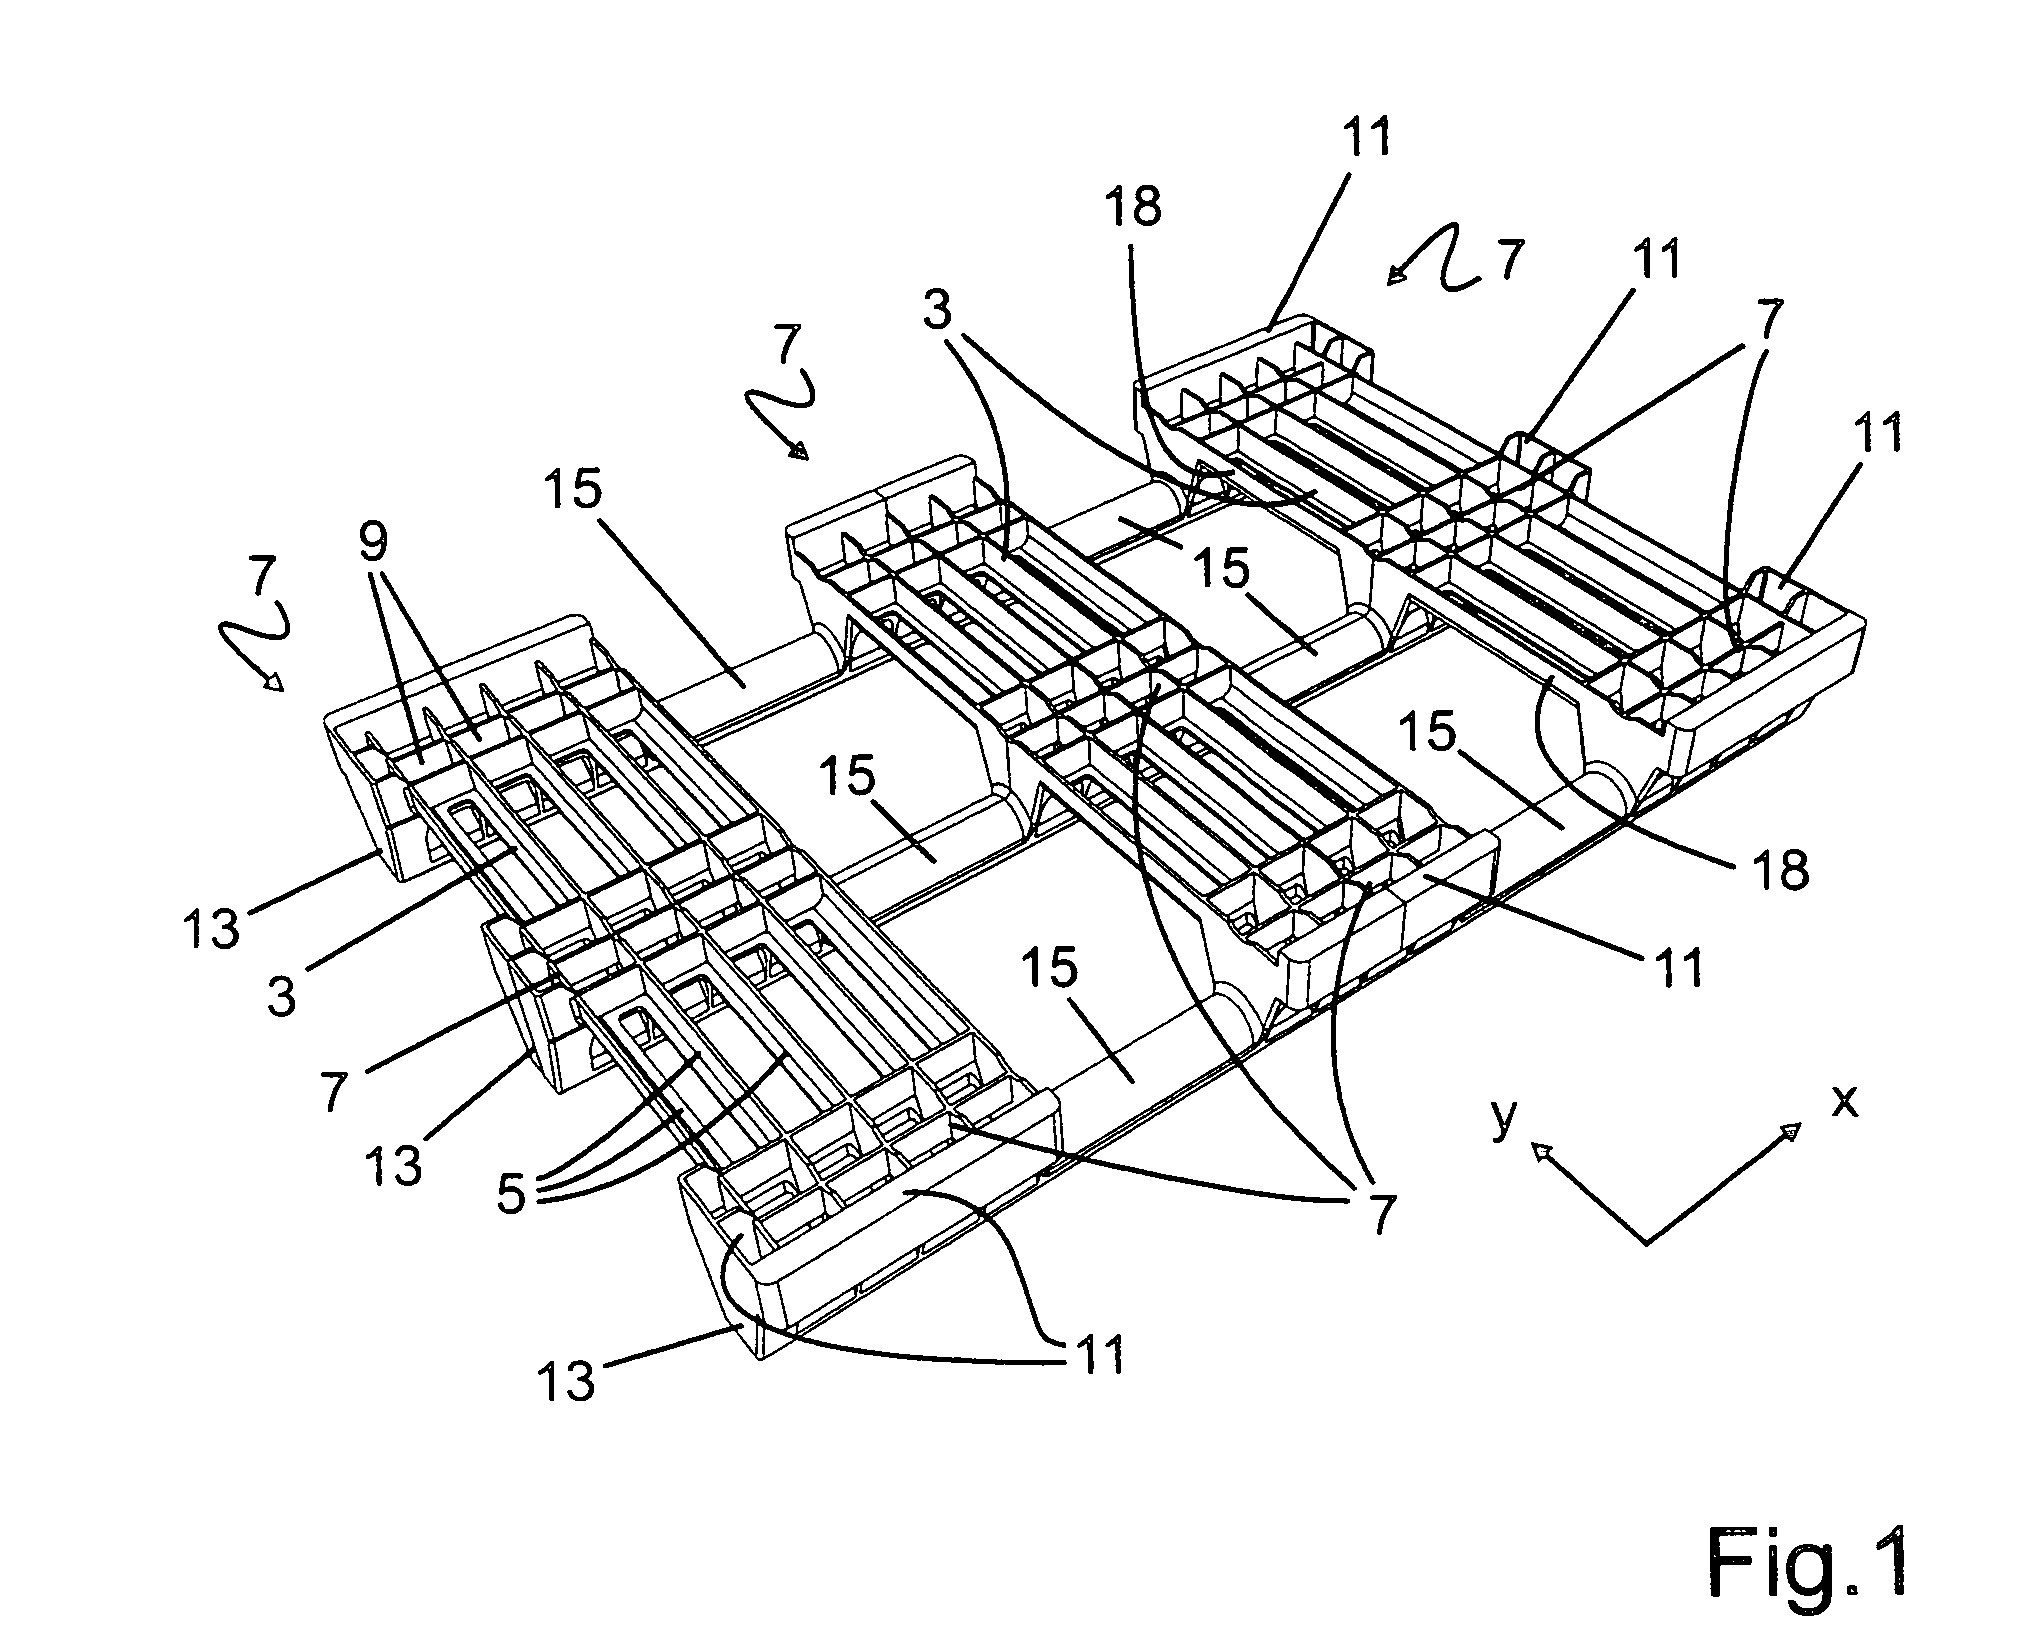 Shuttle Pallet for a Storage System